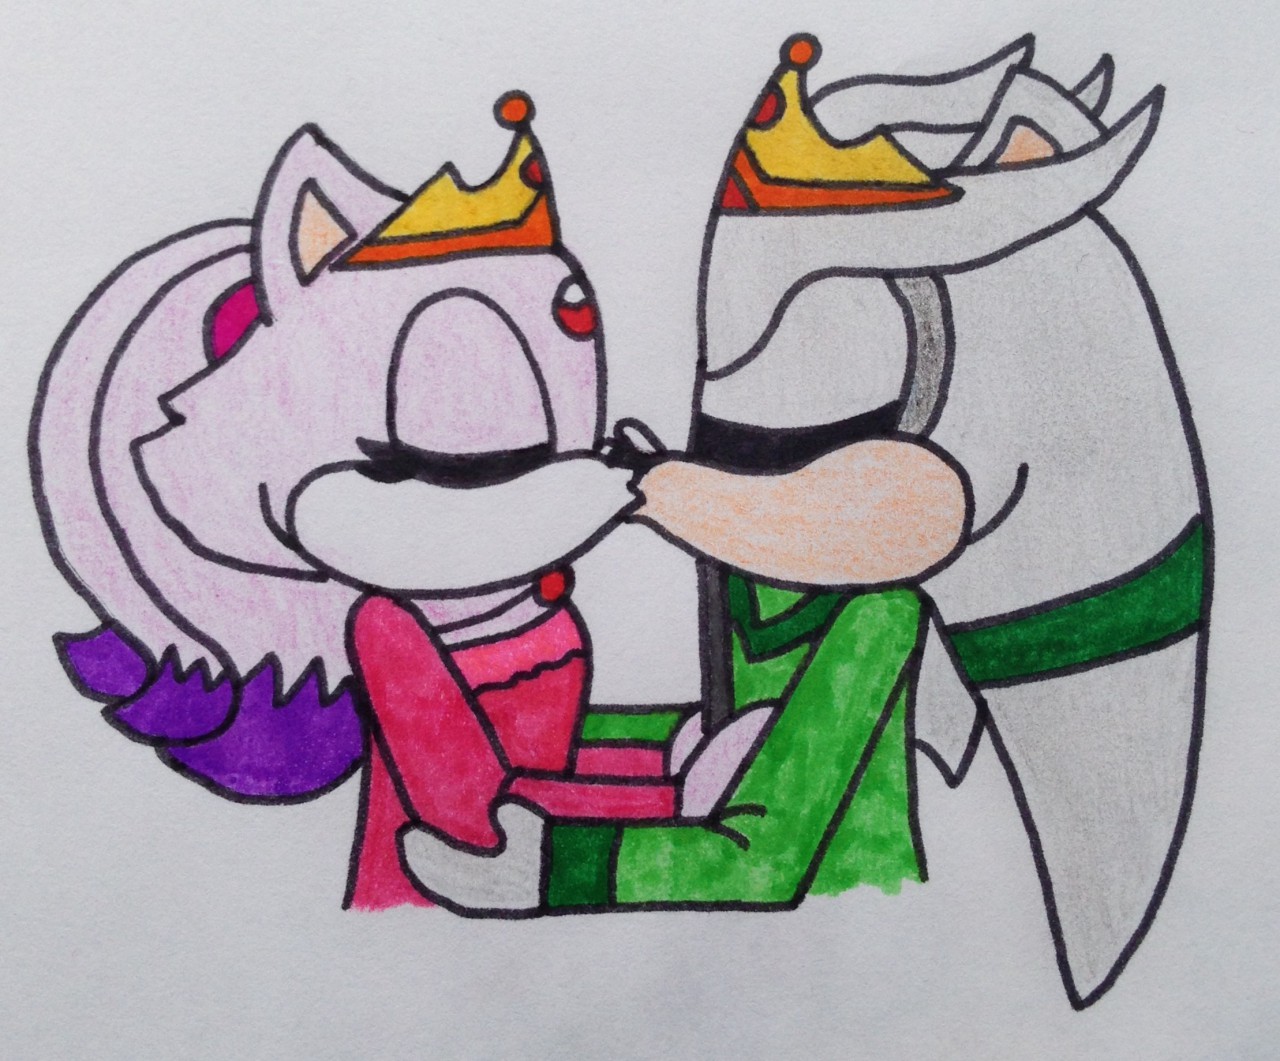 silver the hedgehog and blaze the cat kissing